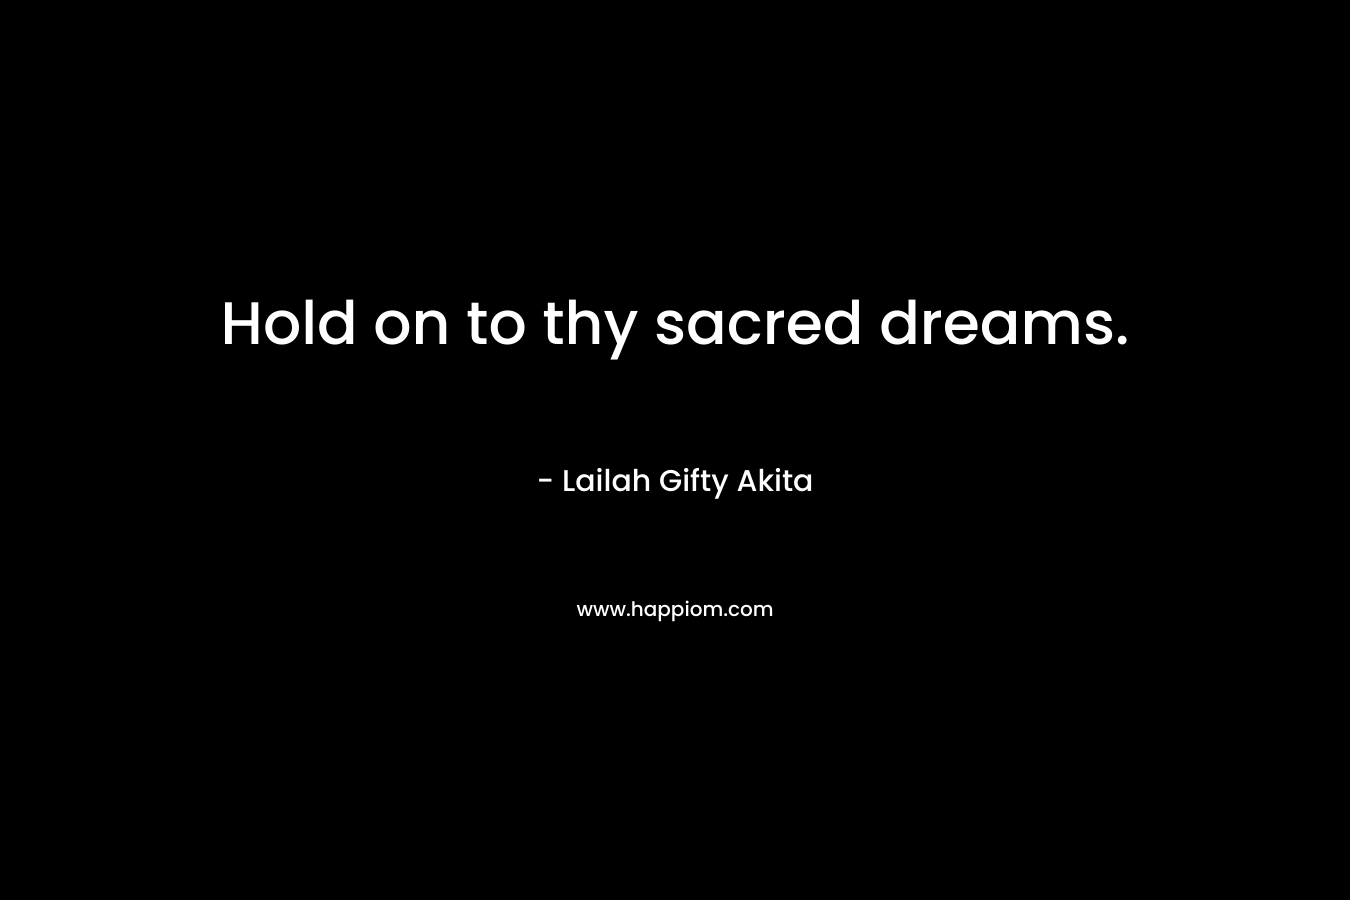 Hold on to thy sacred dreams.